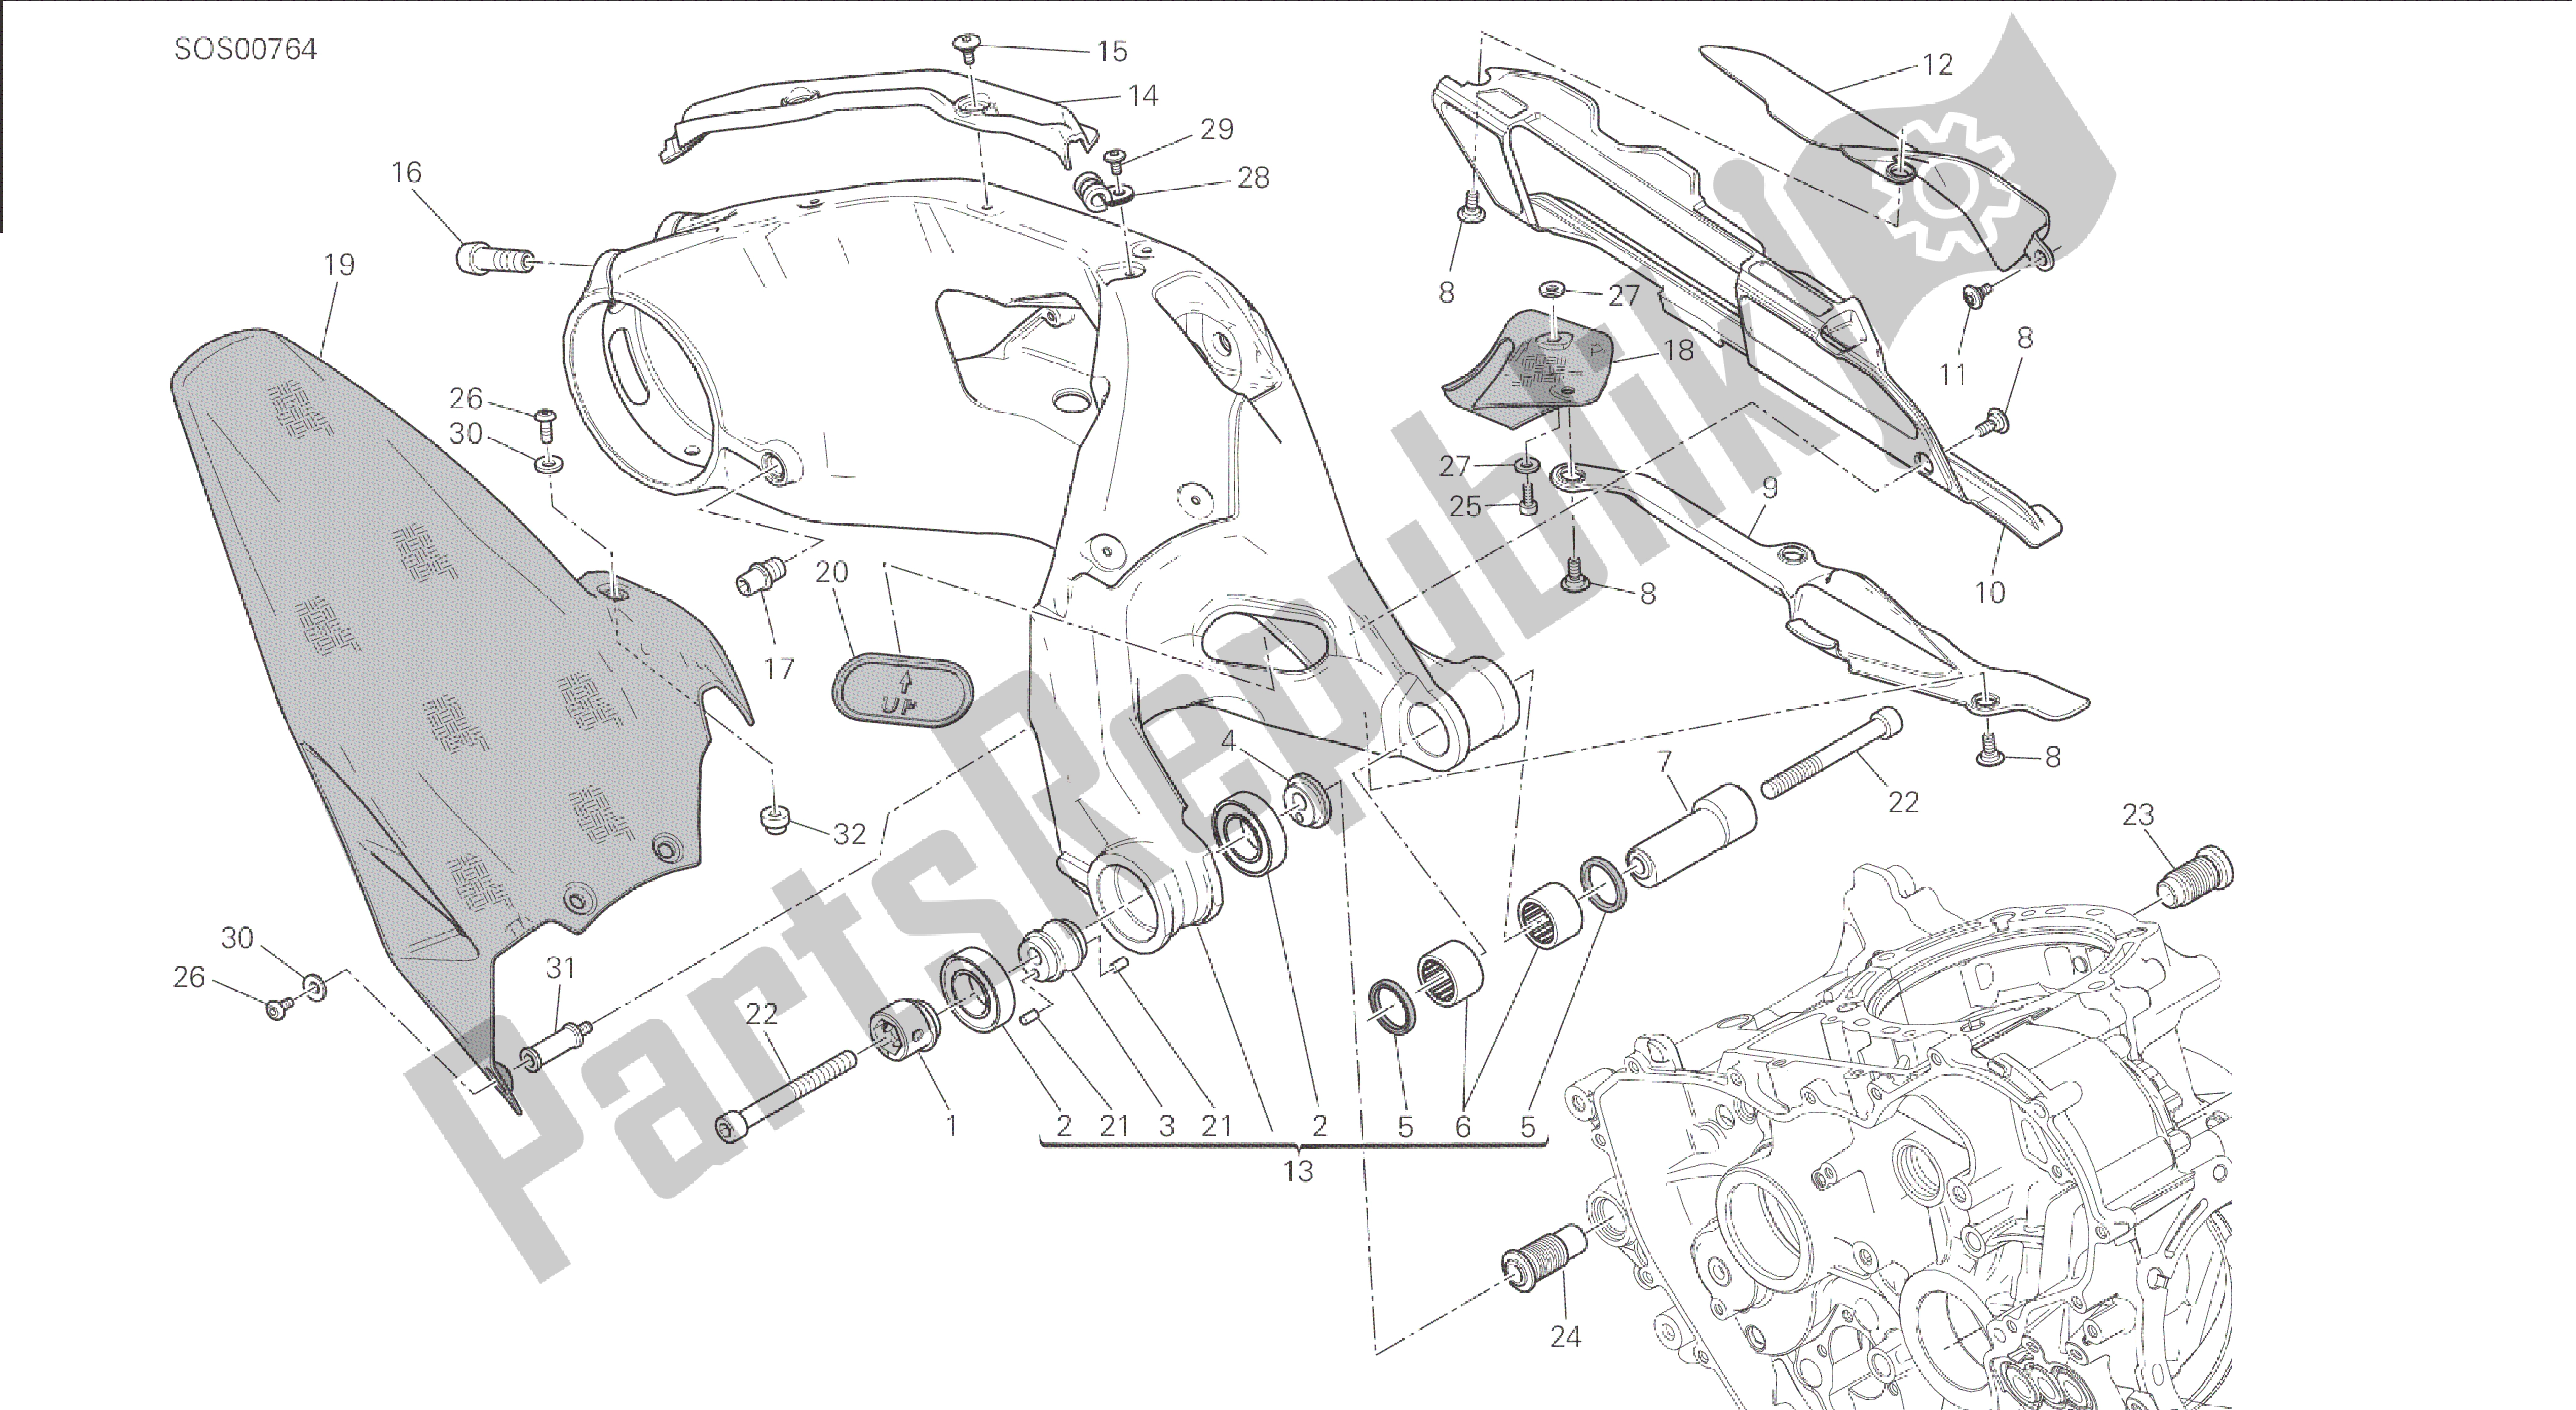 All parts for the Drawing 28a - Forcellone Posteriore [mod:1199 R;xst:aus,eur,fra,jap,twn]group Frame of the Ducati Panigale 1198 2015